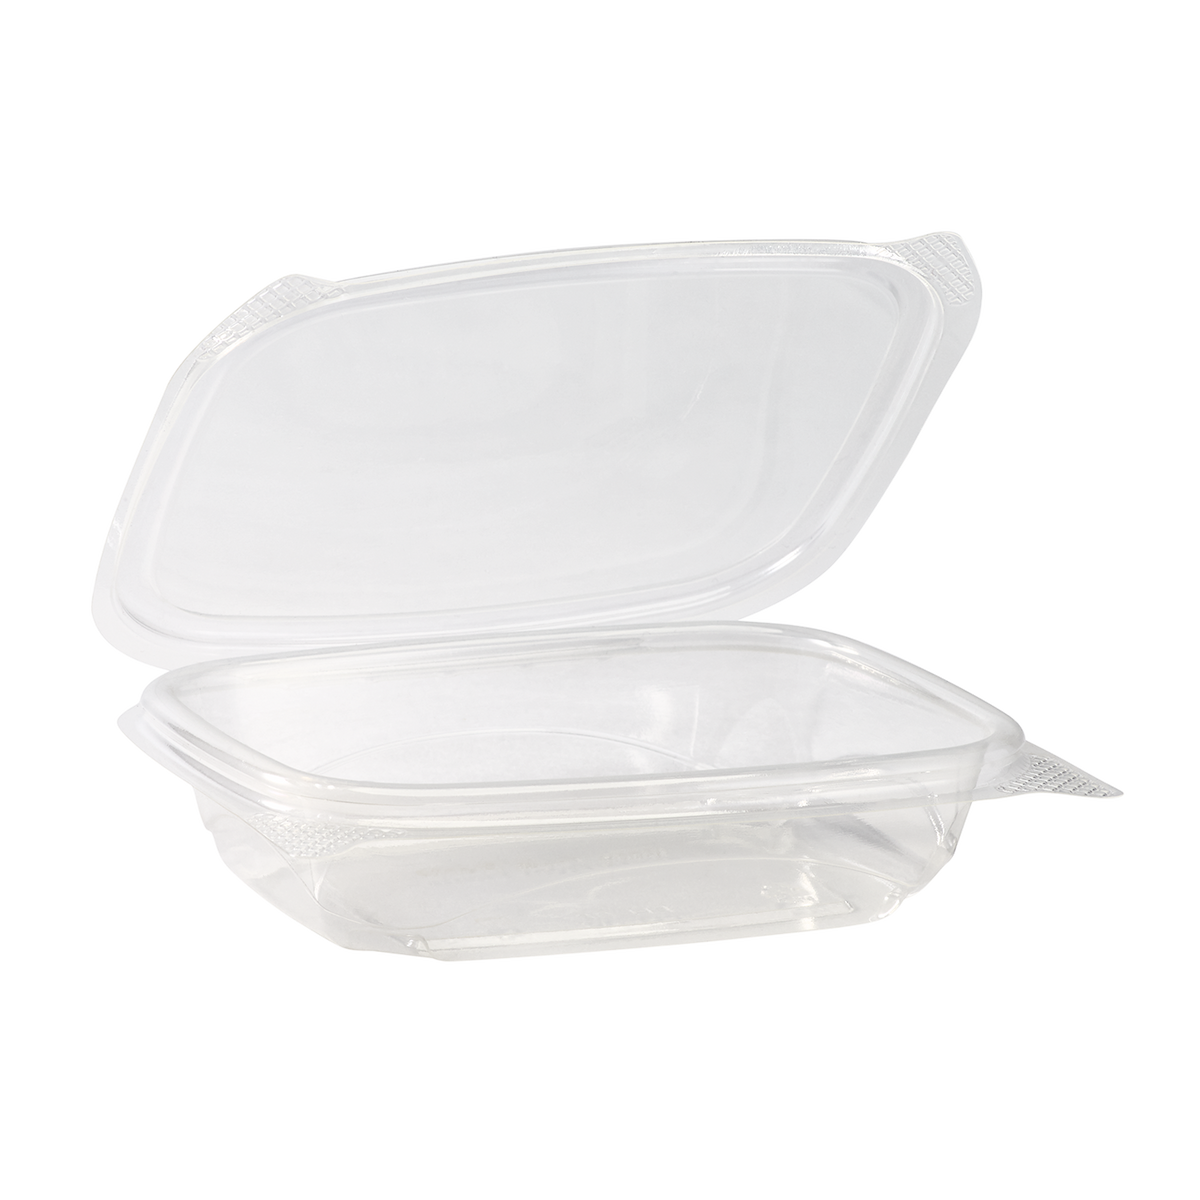 Hinged 8 oz Deli Take Out Food Container - 5 3/8L x 4 1/2W x 1 1/2H